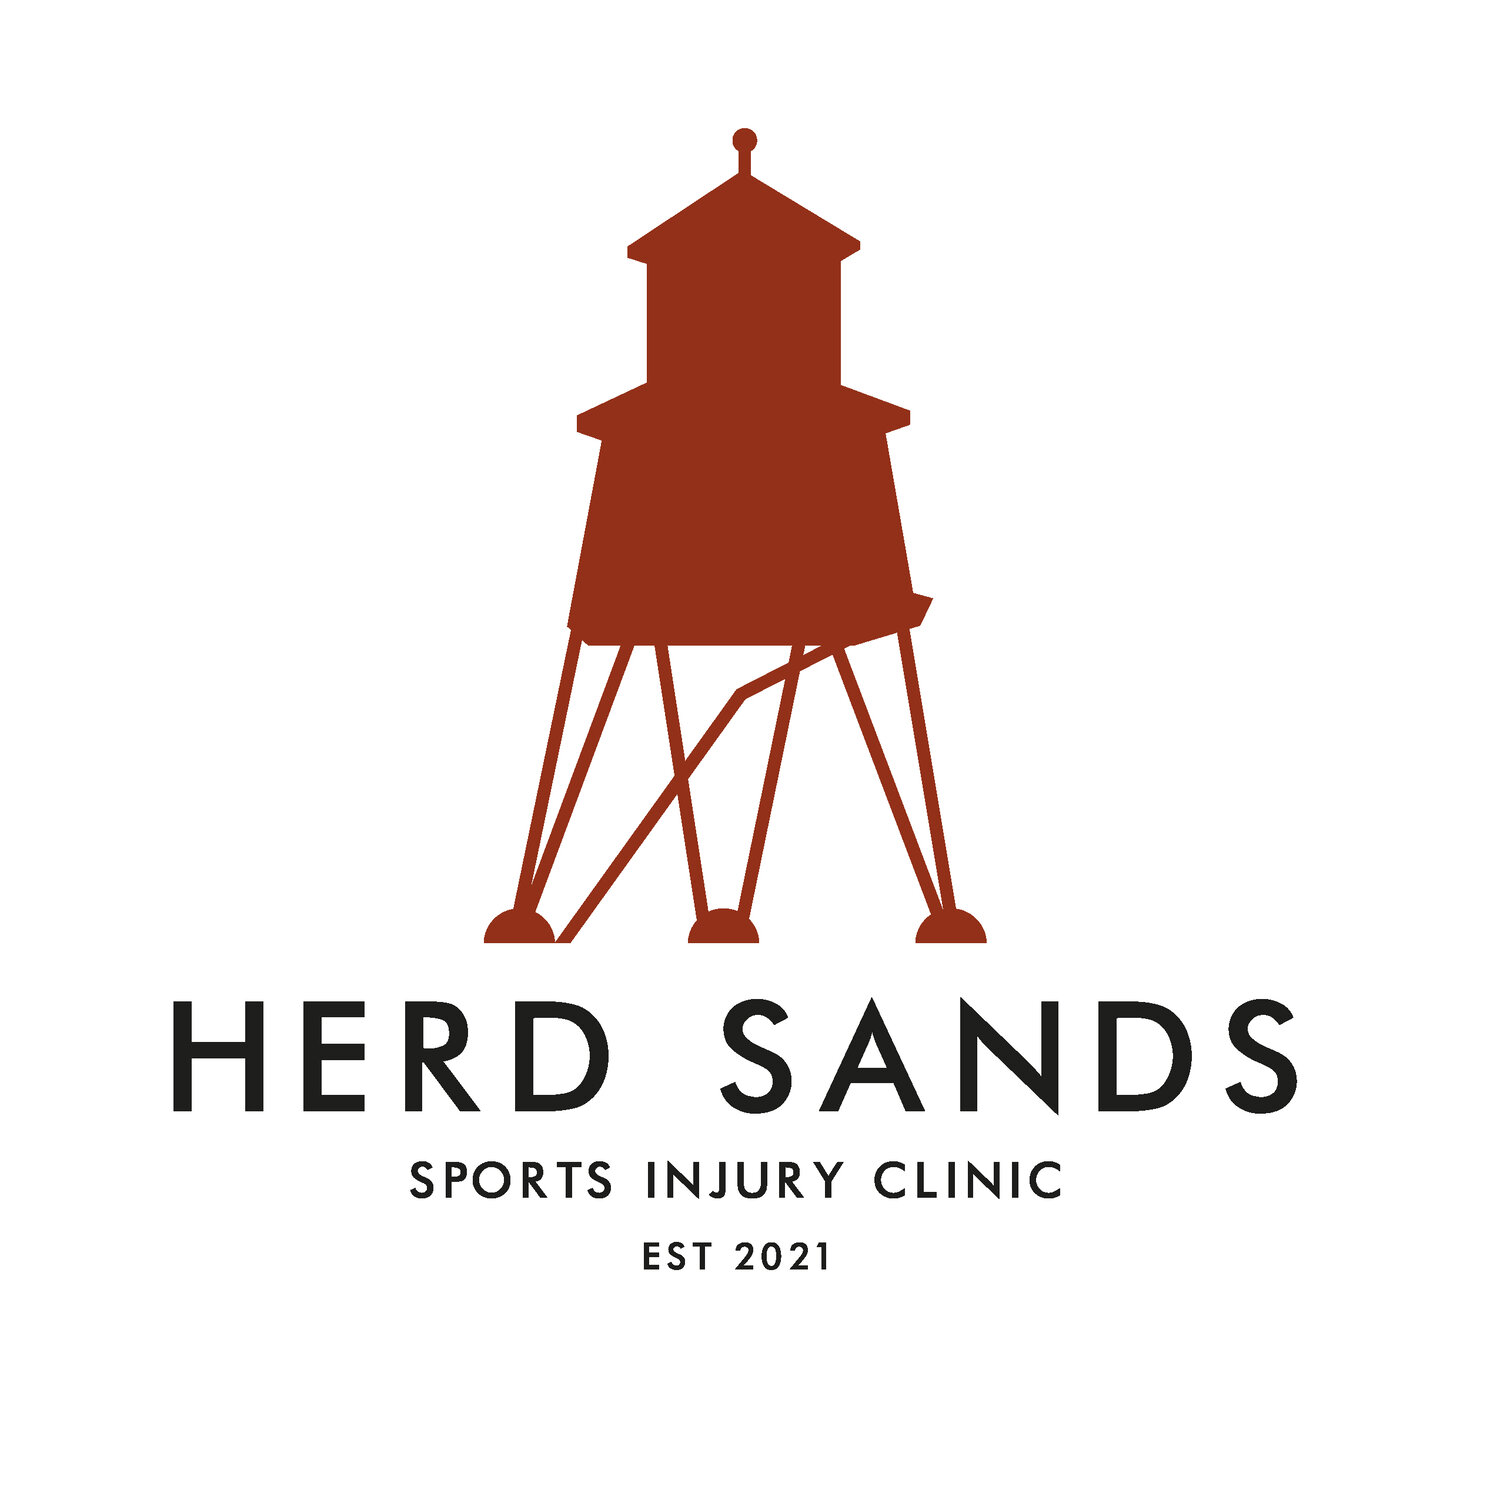 Herd Sands Sports Injury Clinic